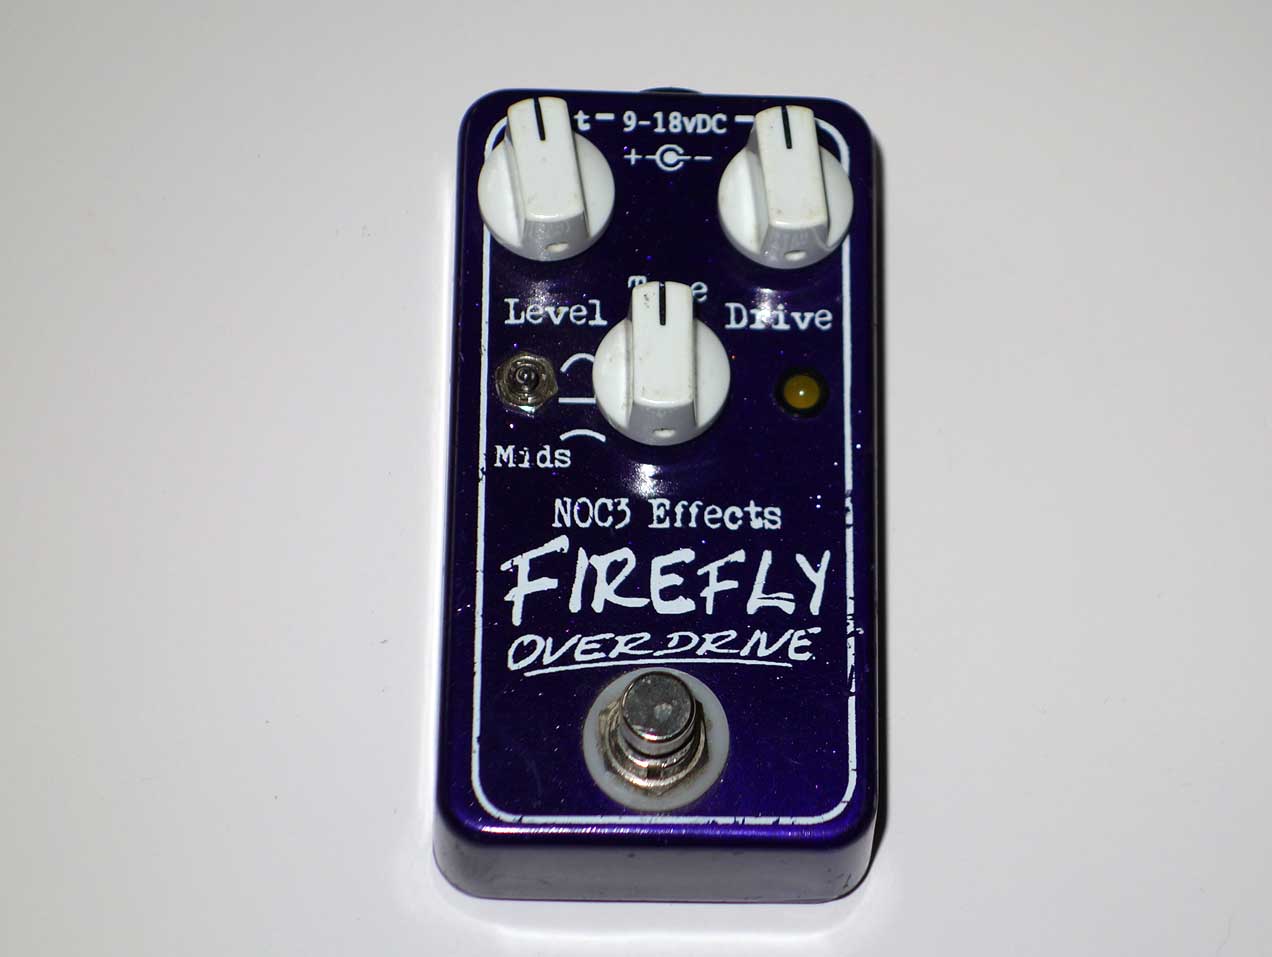 NOC3 Effects FireFly Serial #001 OD Overdrive Distortion Pedal for Electric Guitars Signed by Colquitt